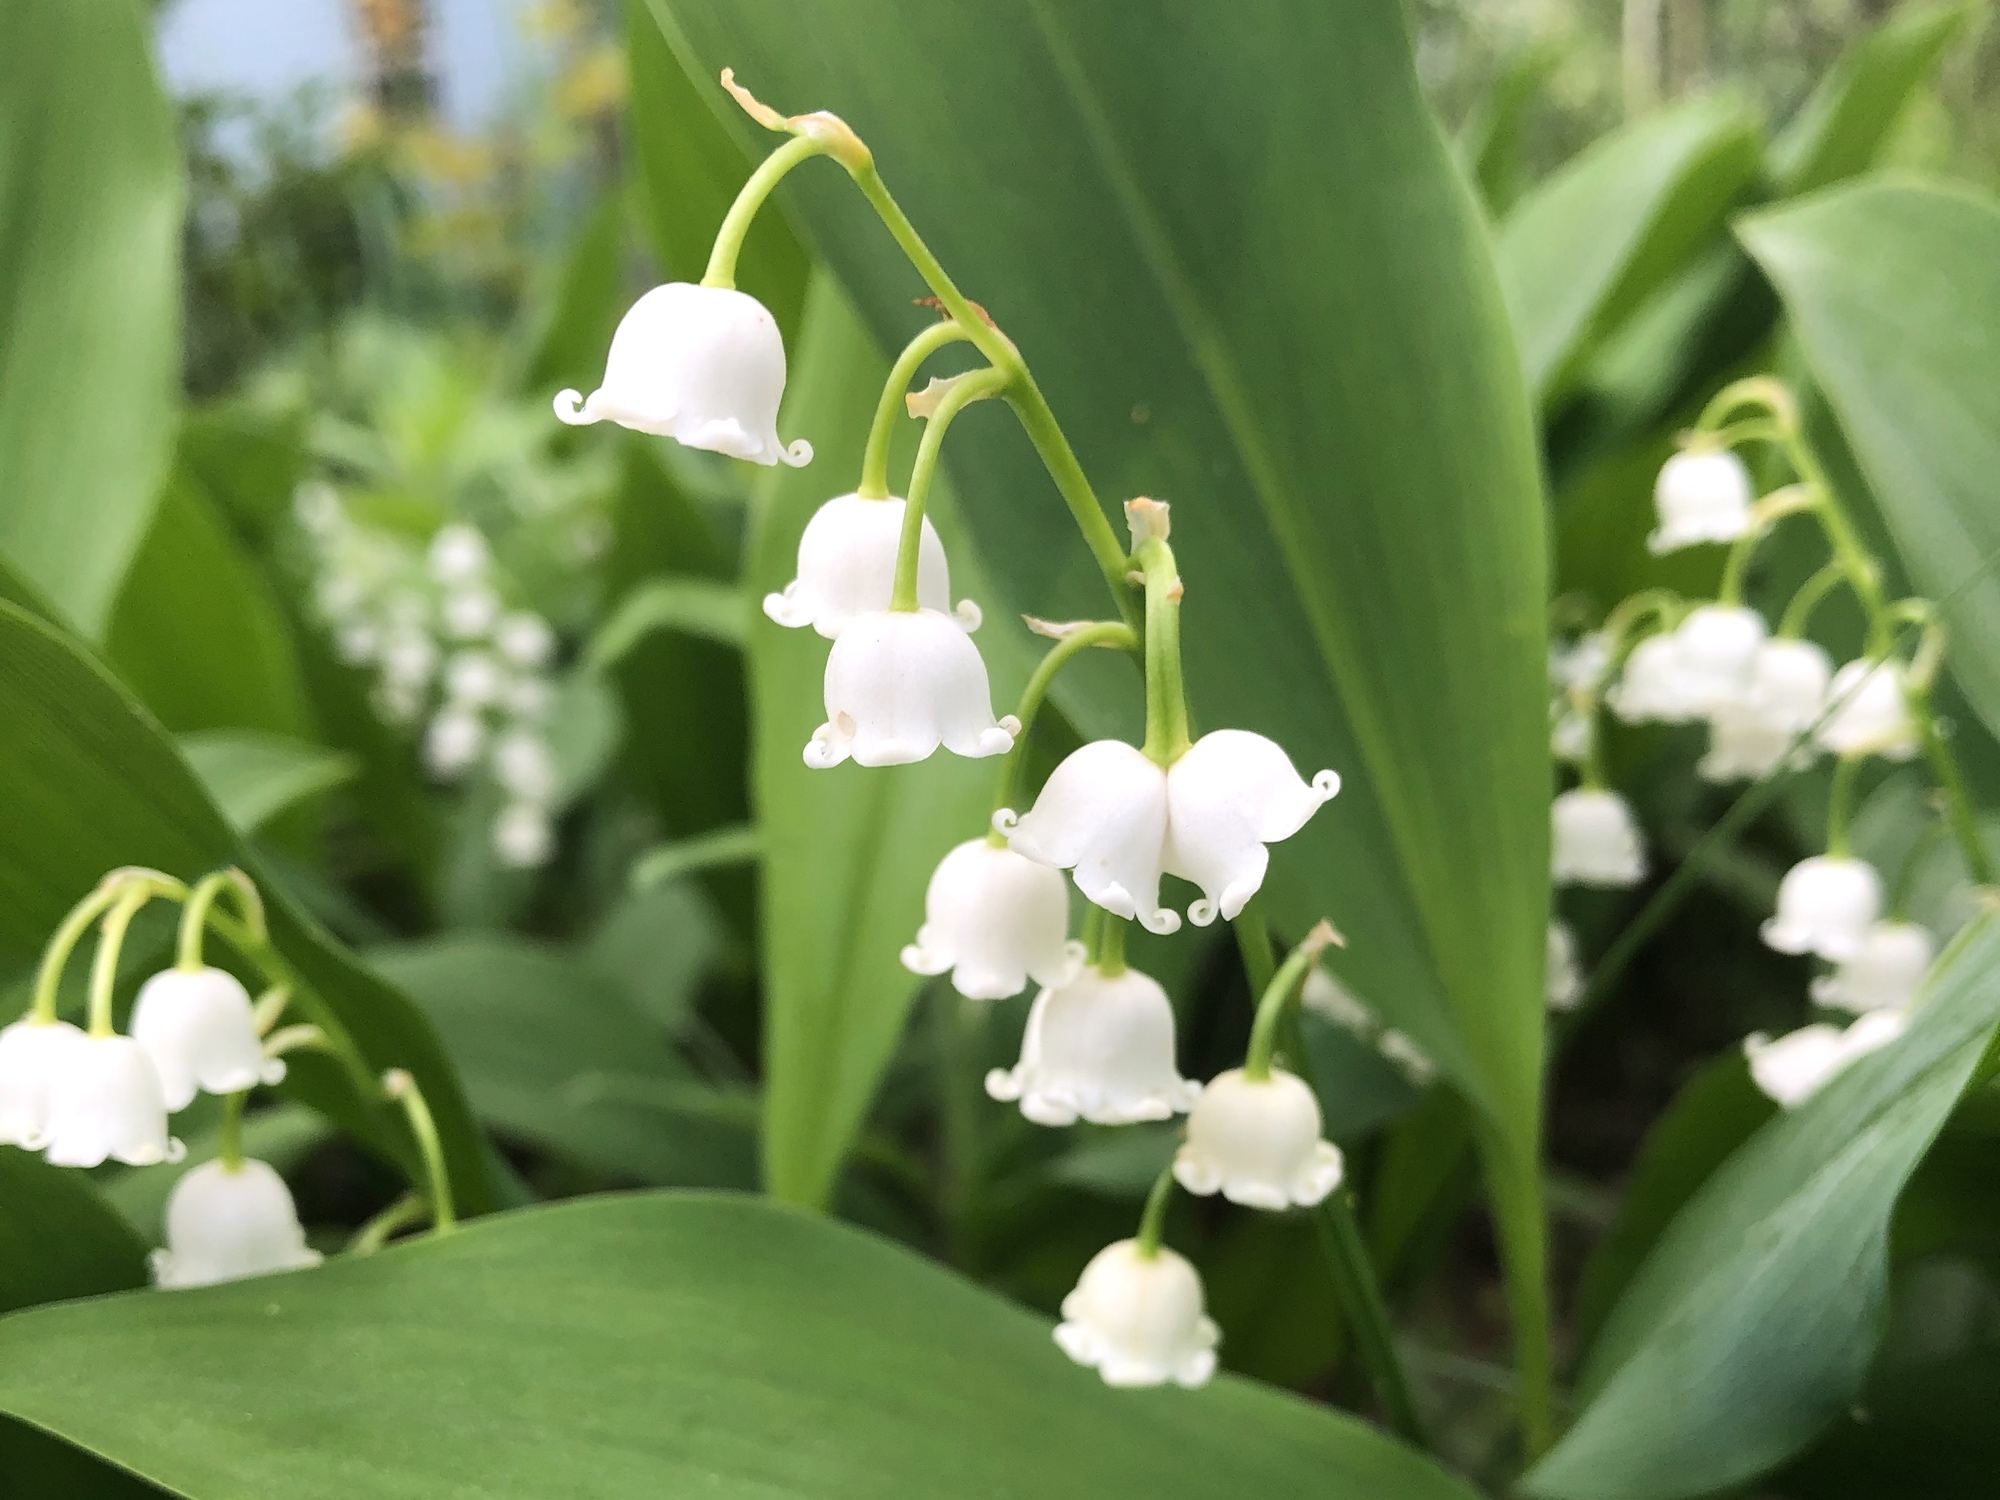 Lilly of the Valley by Duck Pond on May 25, 2019.